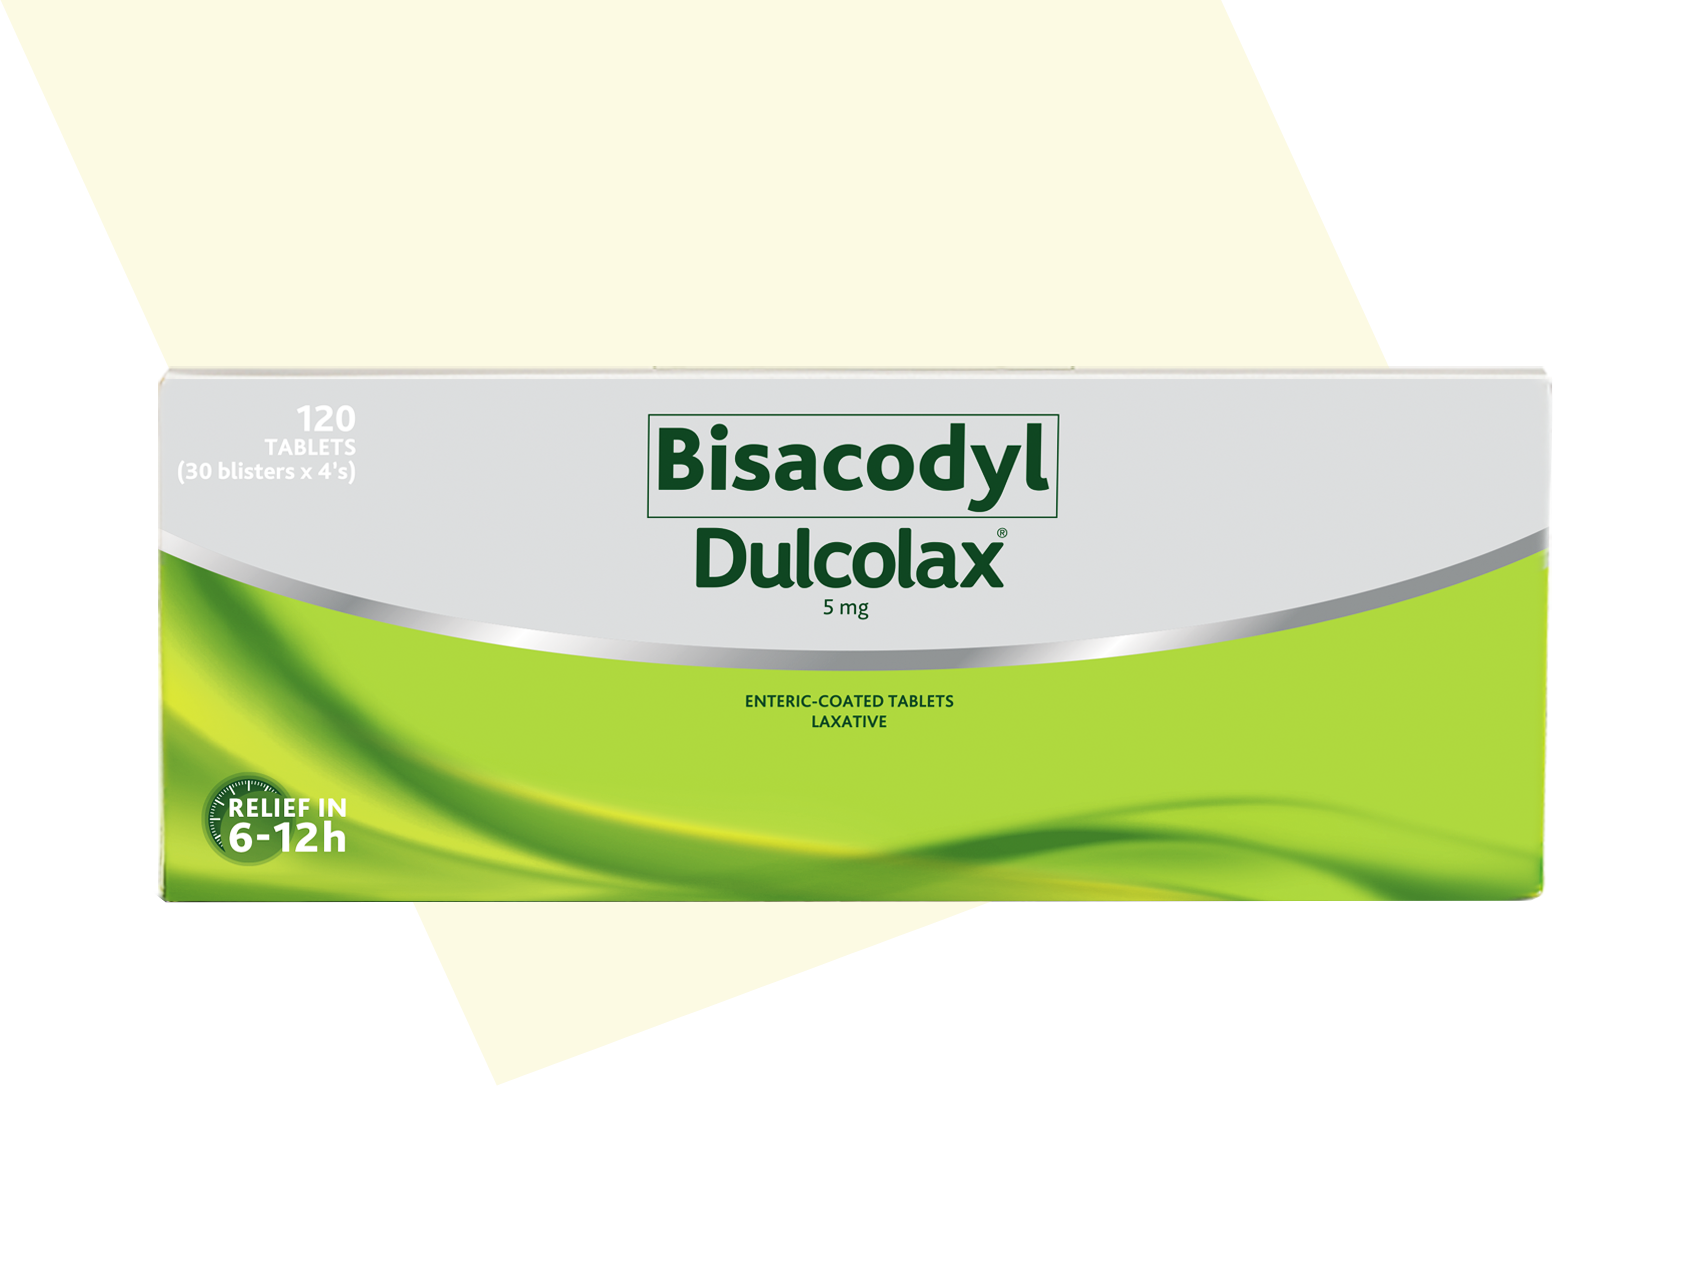 Dulcolax Suppositories For Adults 10 Tablets - Clicks